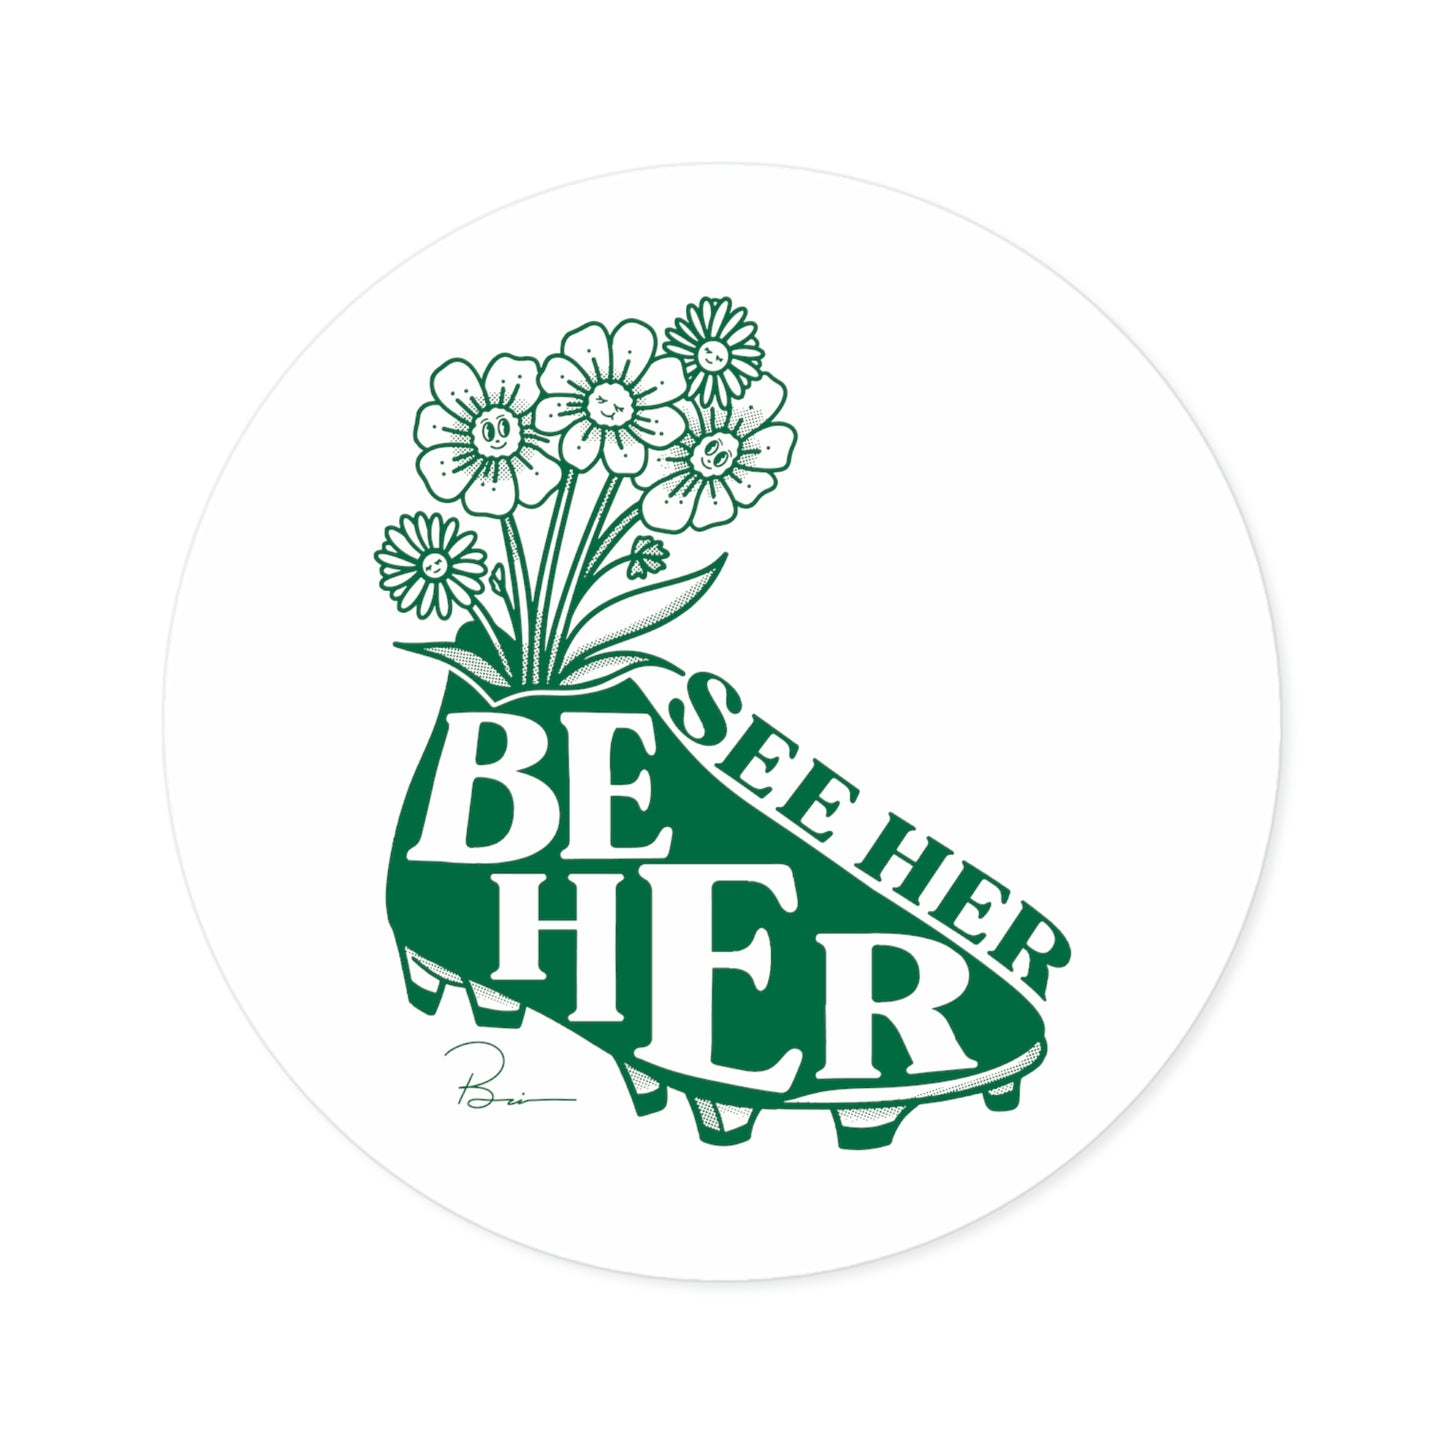 See Her Be Her Sticker, Green